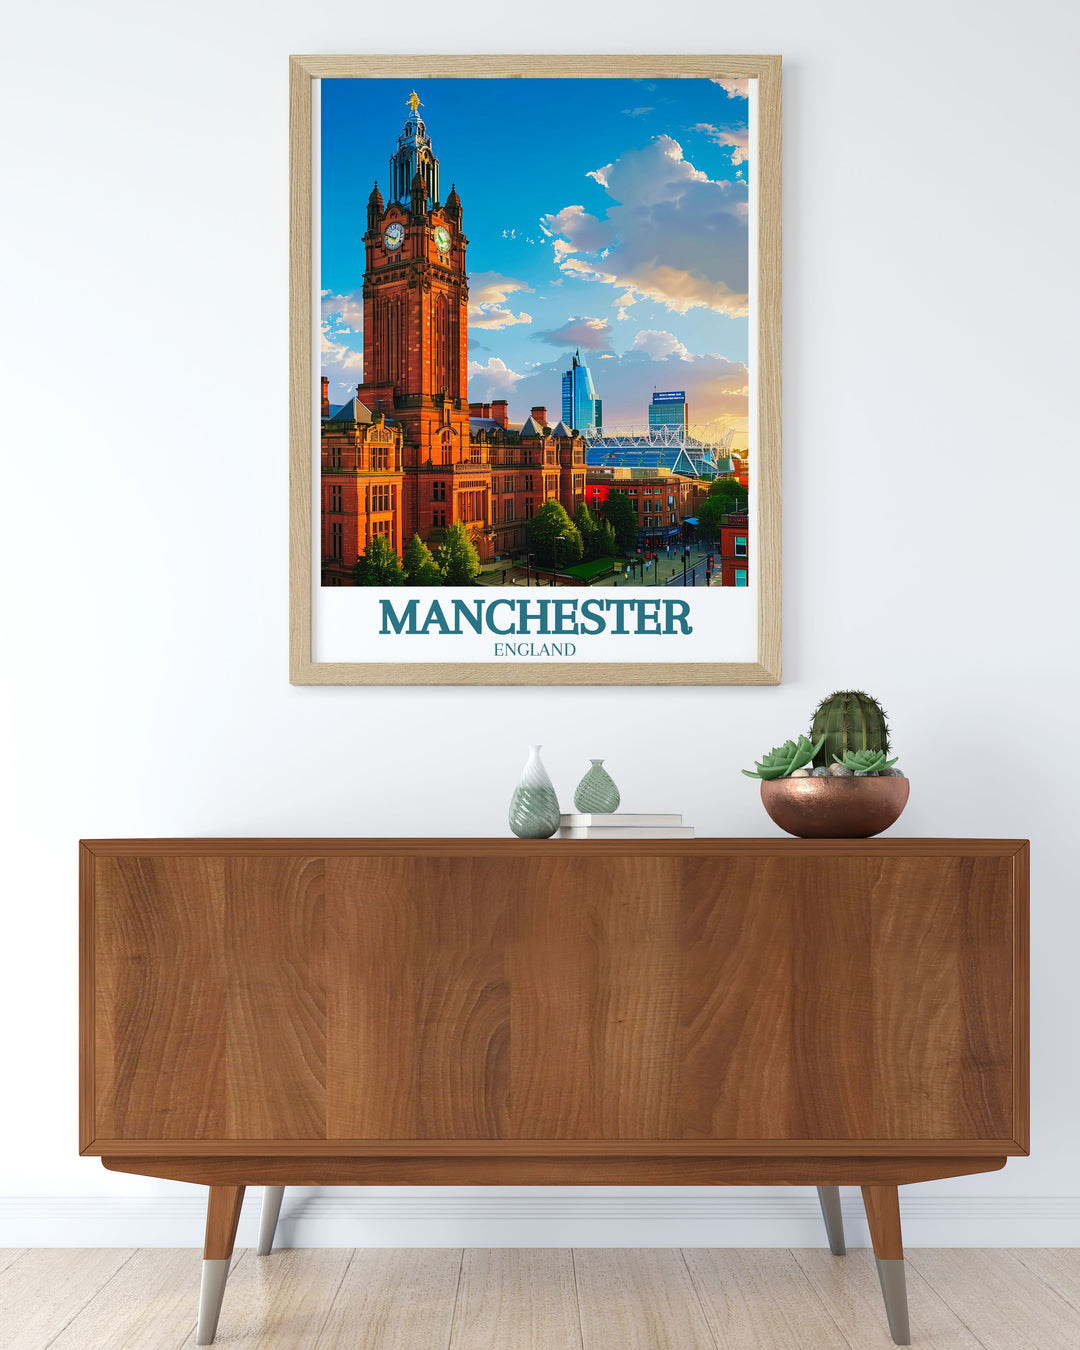 Manchester town hall and Old Trafford stadium poster featuring the citys famous landmarks perfect for travel enthusiasts and art collectors who want to bring a piece of Manchesters charm into their homes.